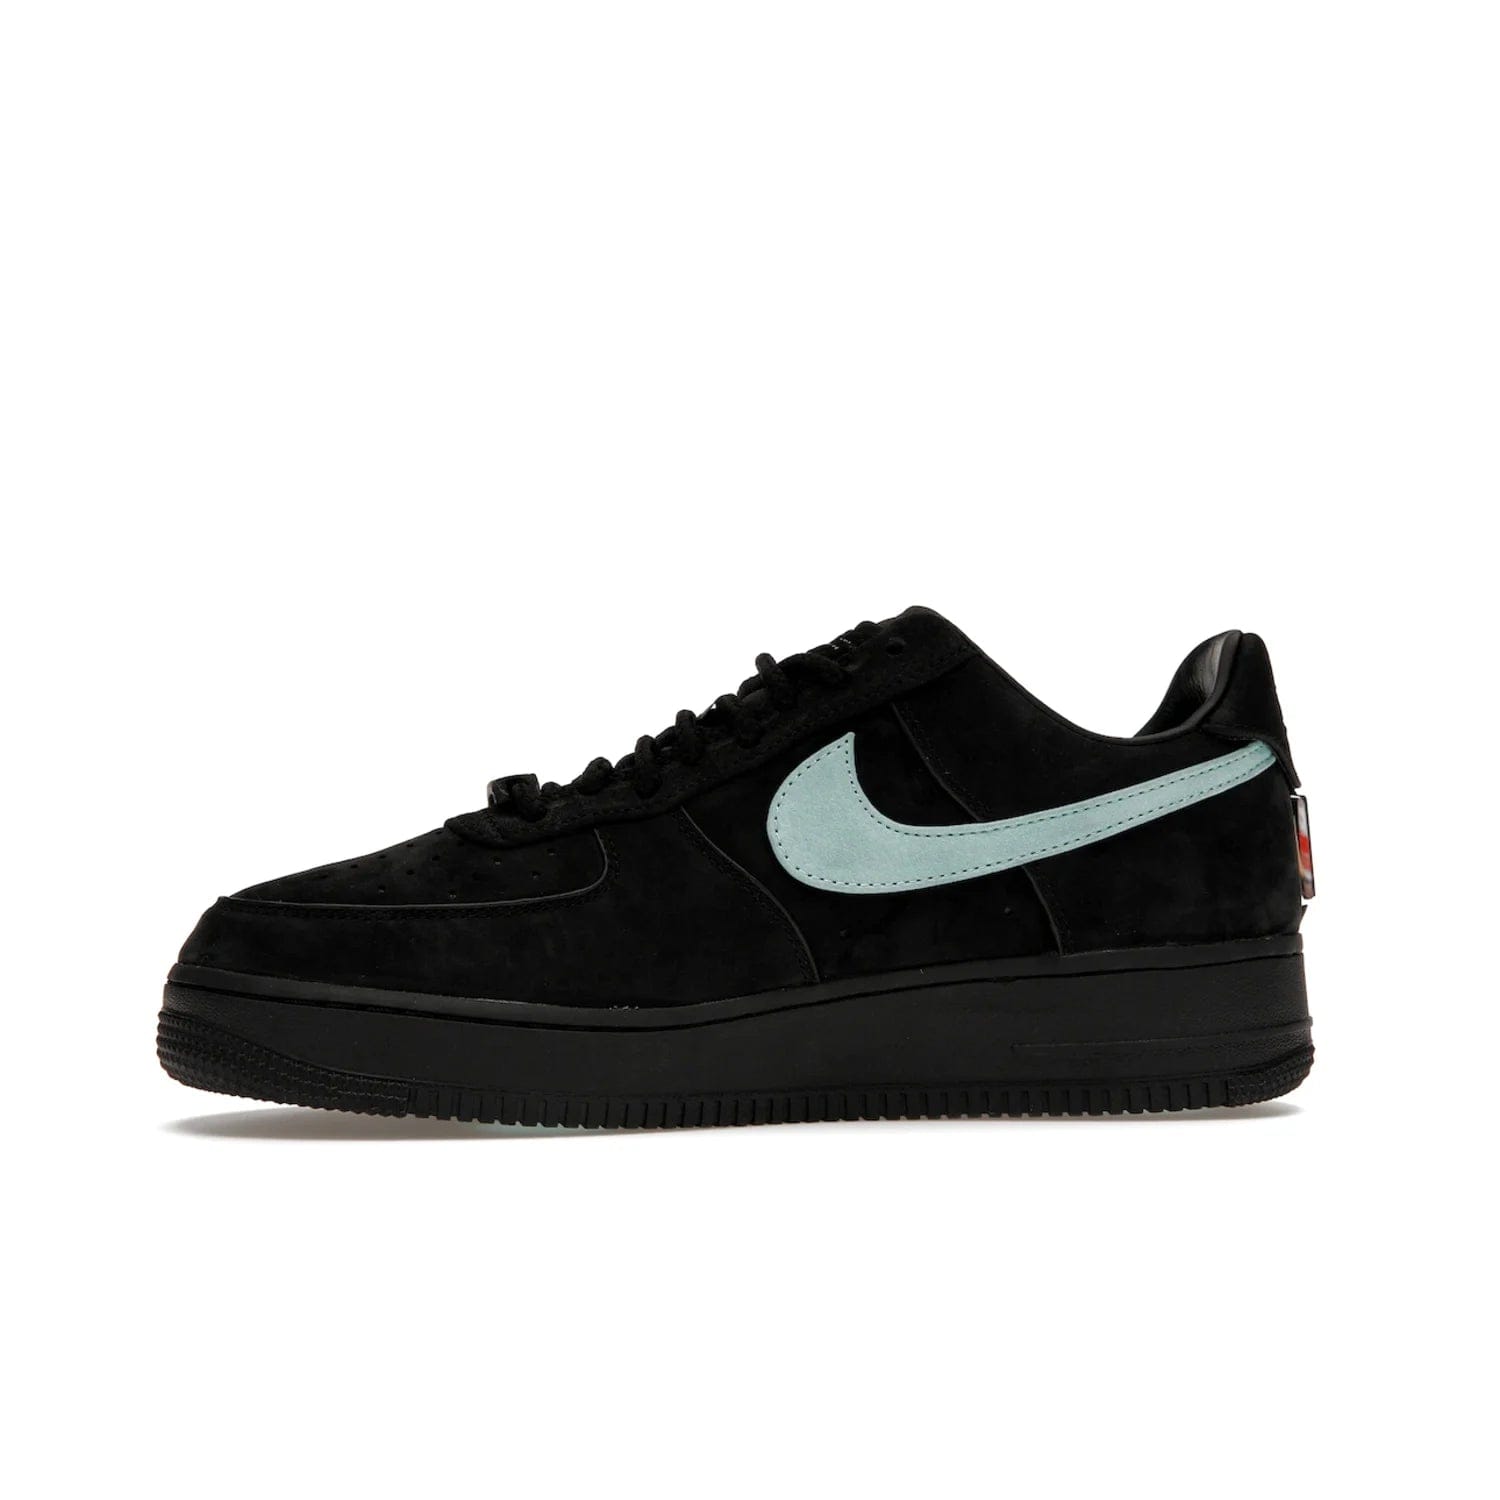 Nike Air Force 1 Low Tiffany & Co. 1837 - Image 18 - Only at www.BallersClubKickz.com - Nike & Tiffany & Co. collaborate on an exclusive sterling silver sneaker, the Air Force 1 Low Tiffany & Co. 1837. Featuring a suede uppr, Tiffany Blue Swoosh and "Tiffany" cursive branding, this pair of AF1s offers an opulent fusion of athleisure and luxury fashion. Release date March 2023.